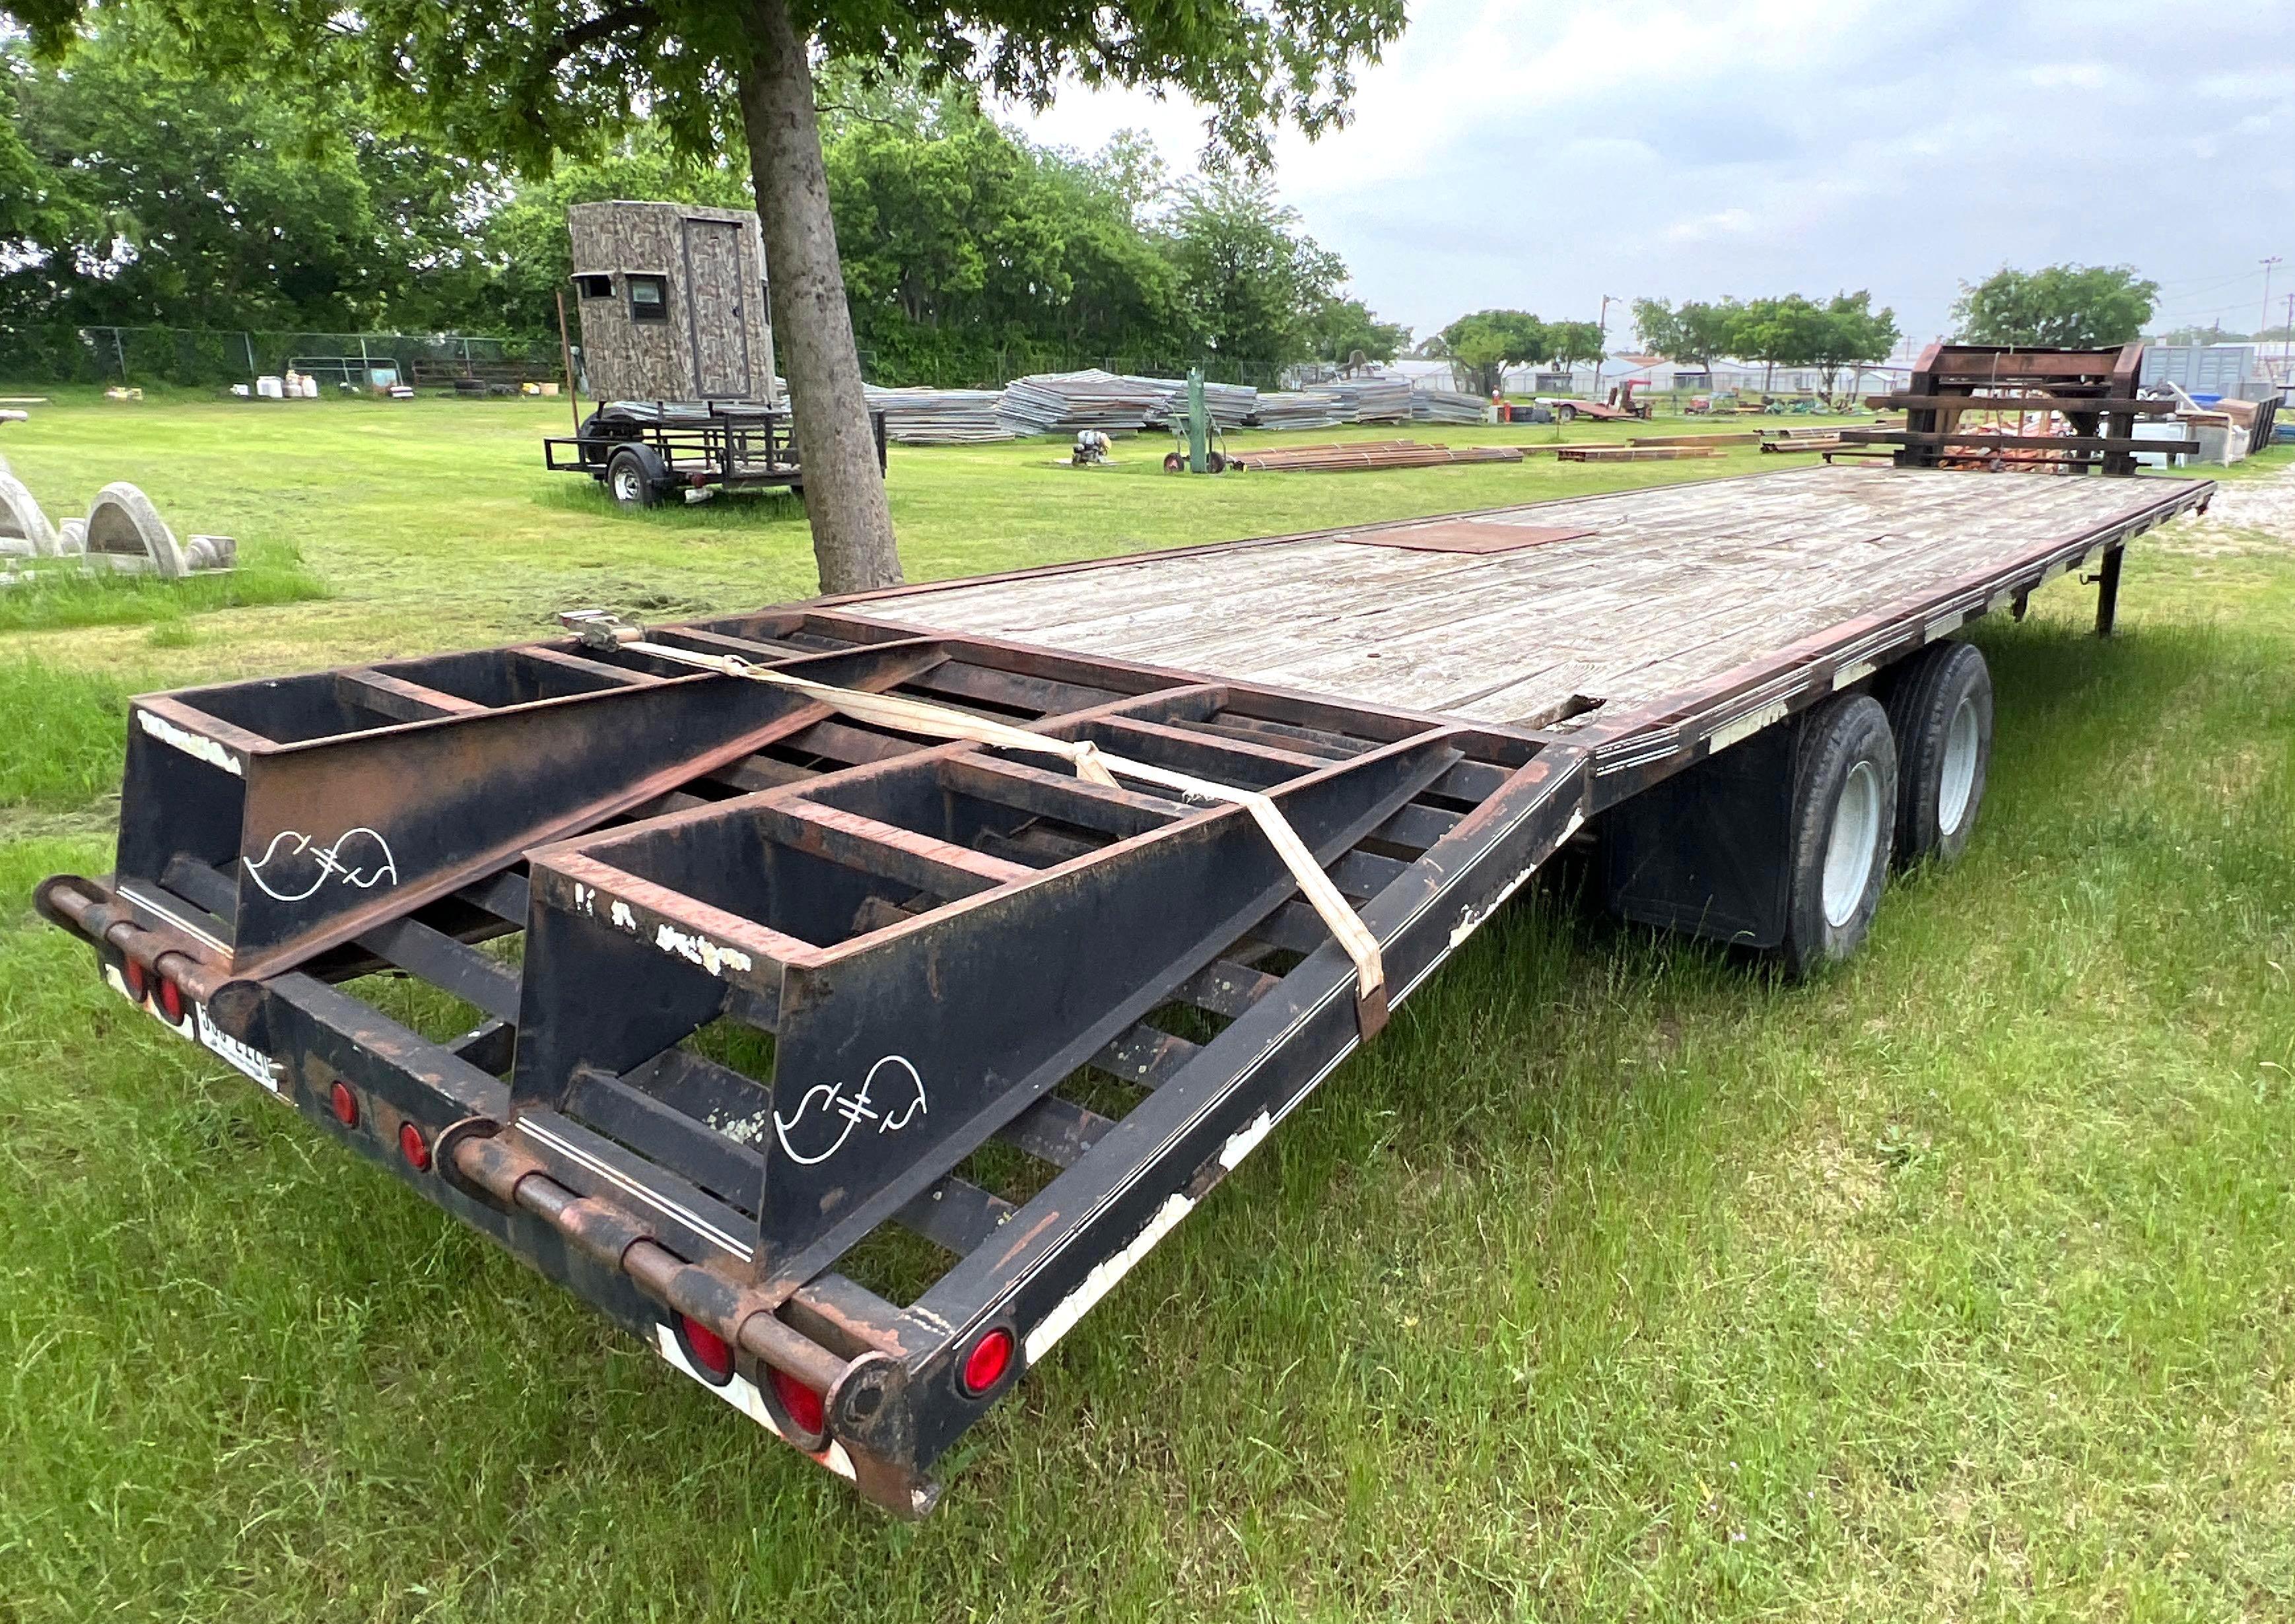 1998 Norris 32 foot Tandem Dual Gooseneck Trailer - 26 foot Deck with 5 foot Dovetail with Ramps